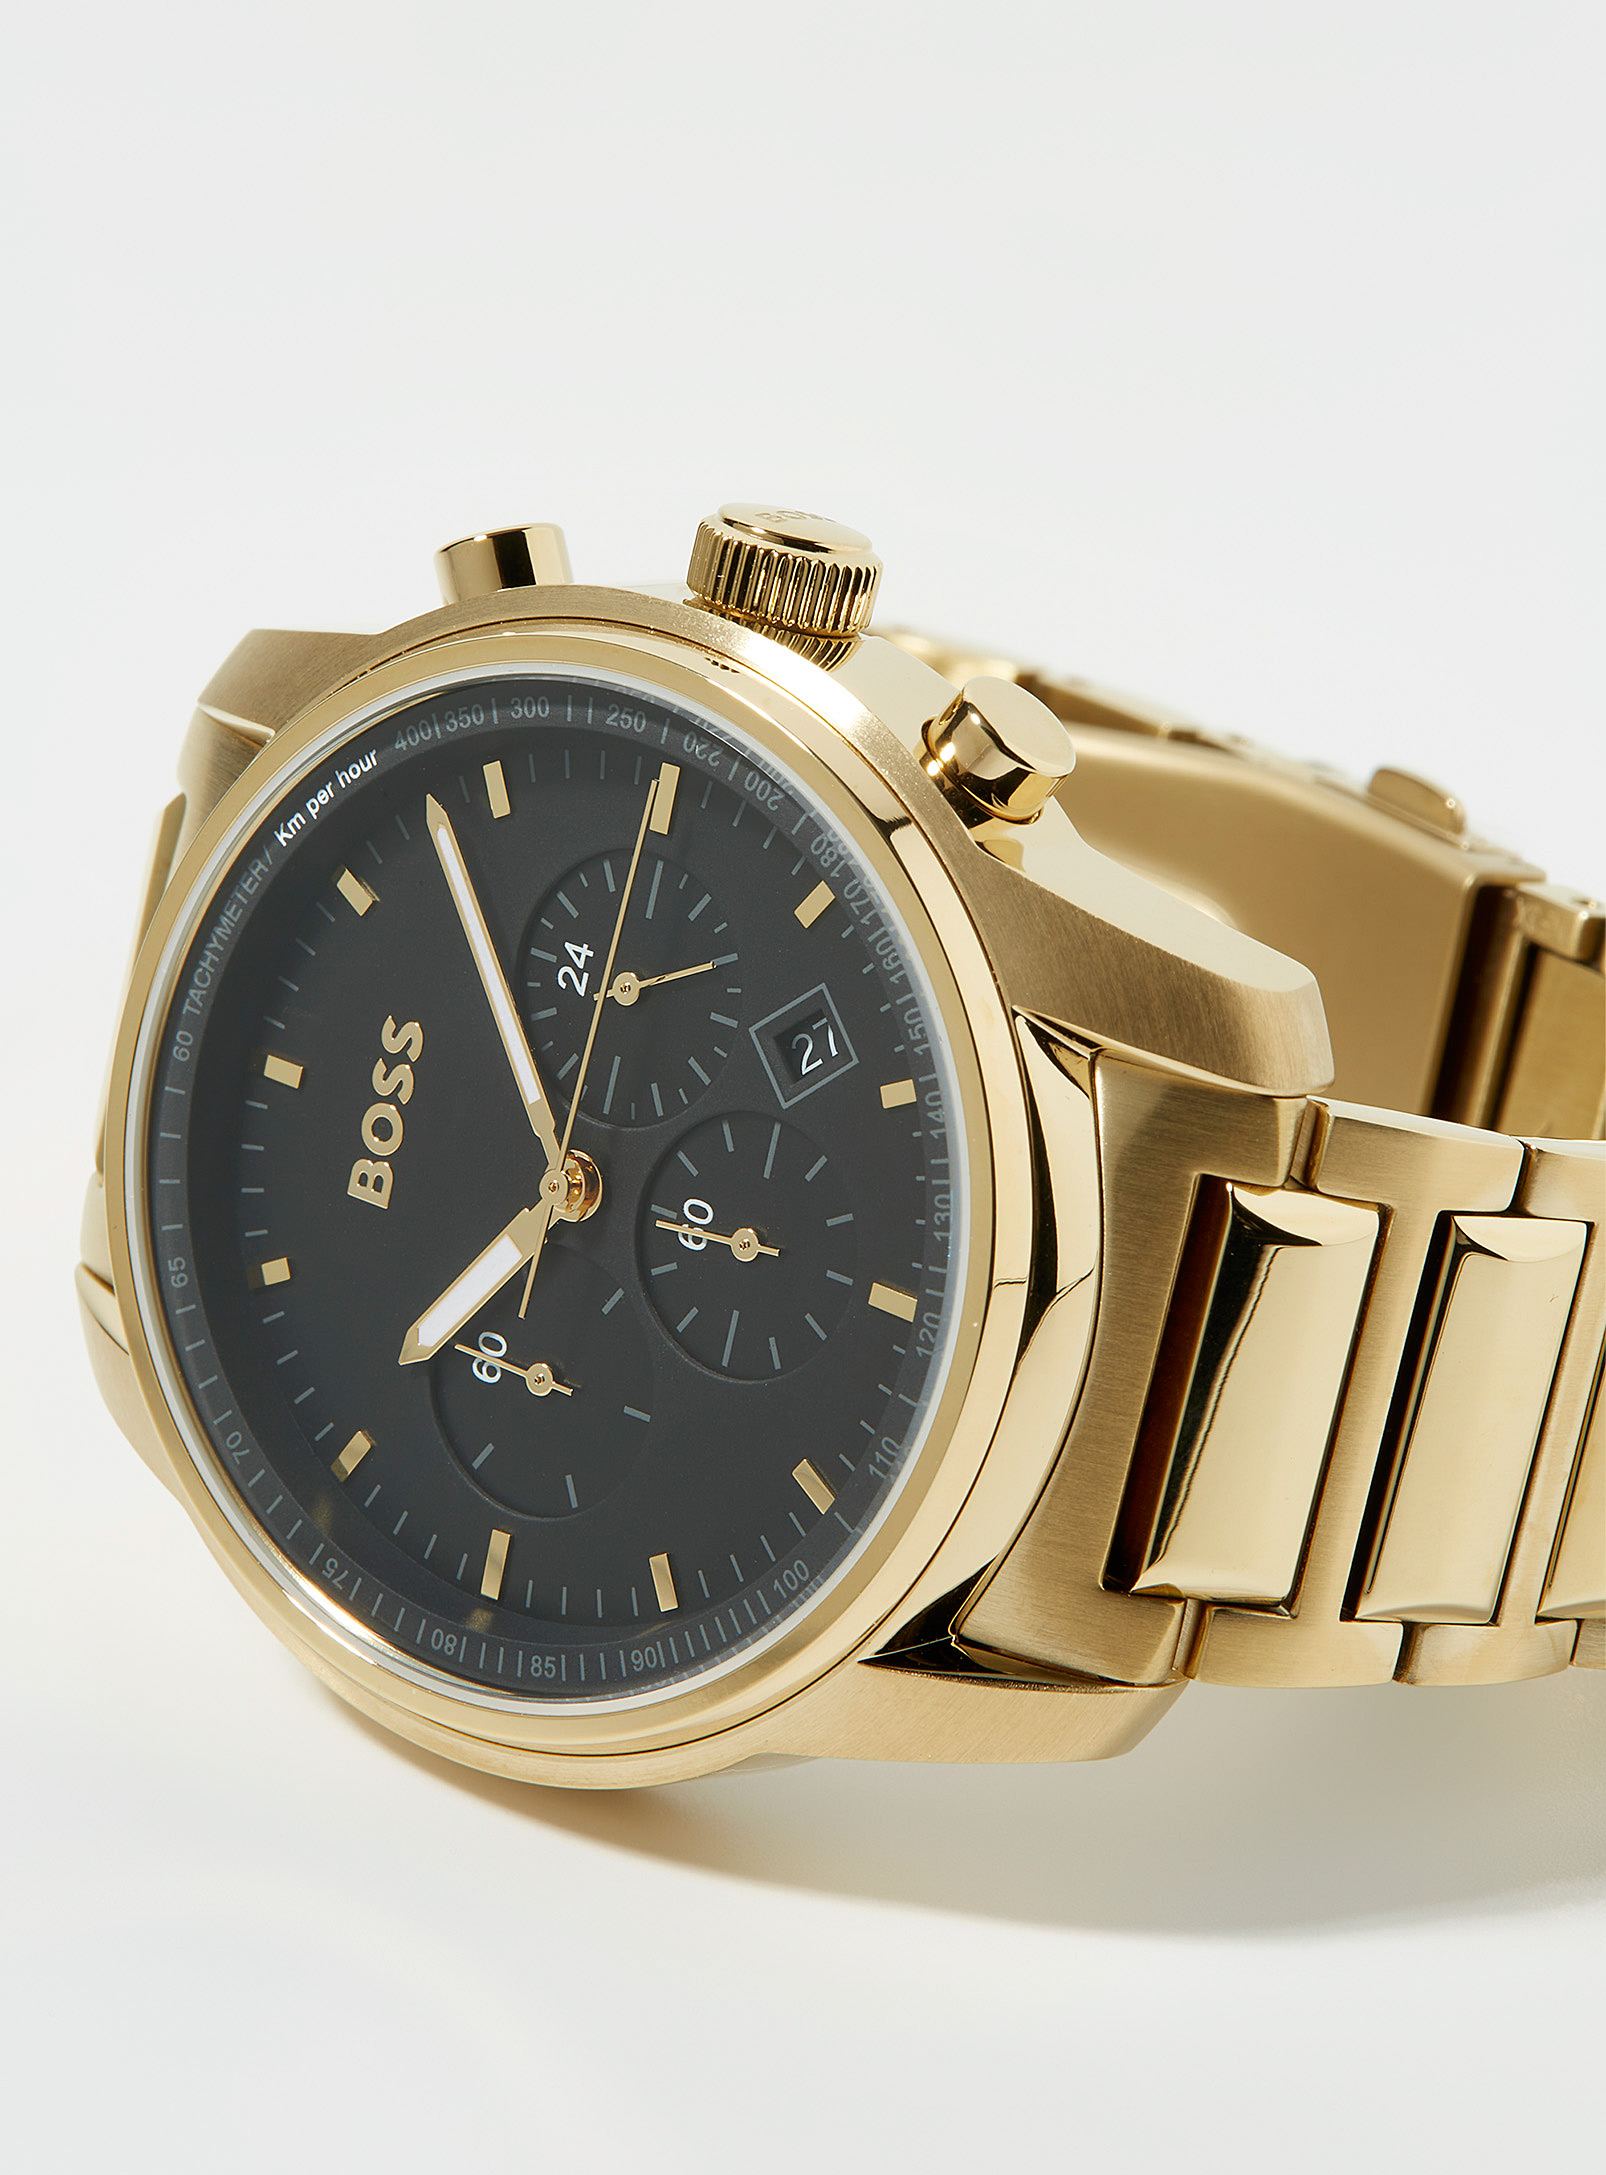 Hugo Boss Gold Chronograph Watch In Assorted